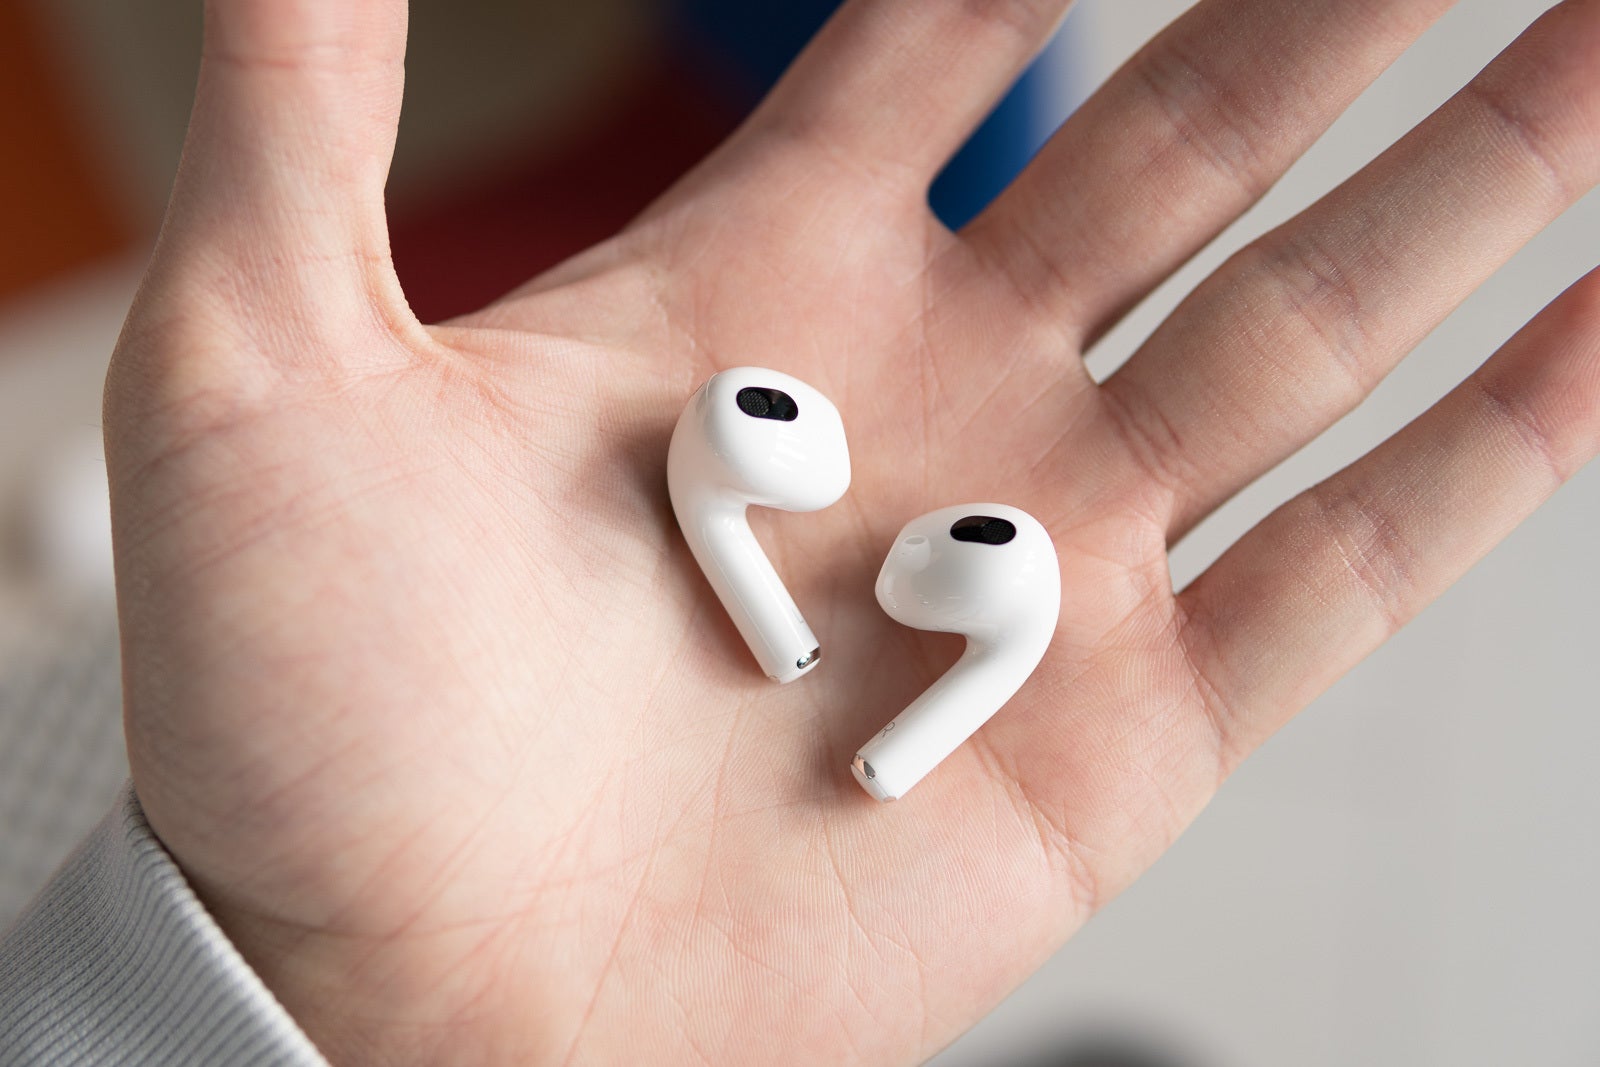 Apple AirPods 4: release date predictions, price, features, and